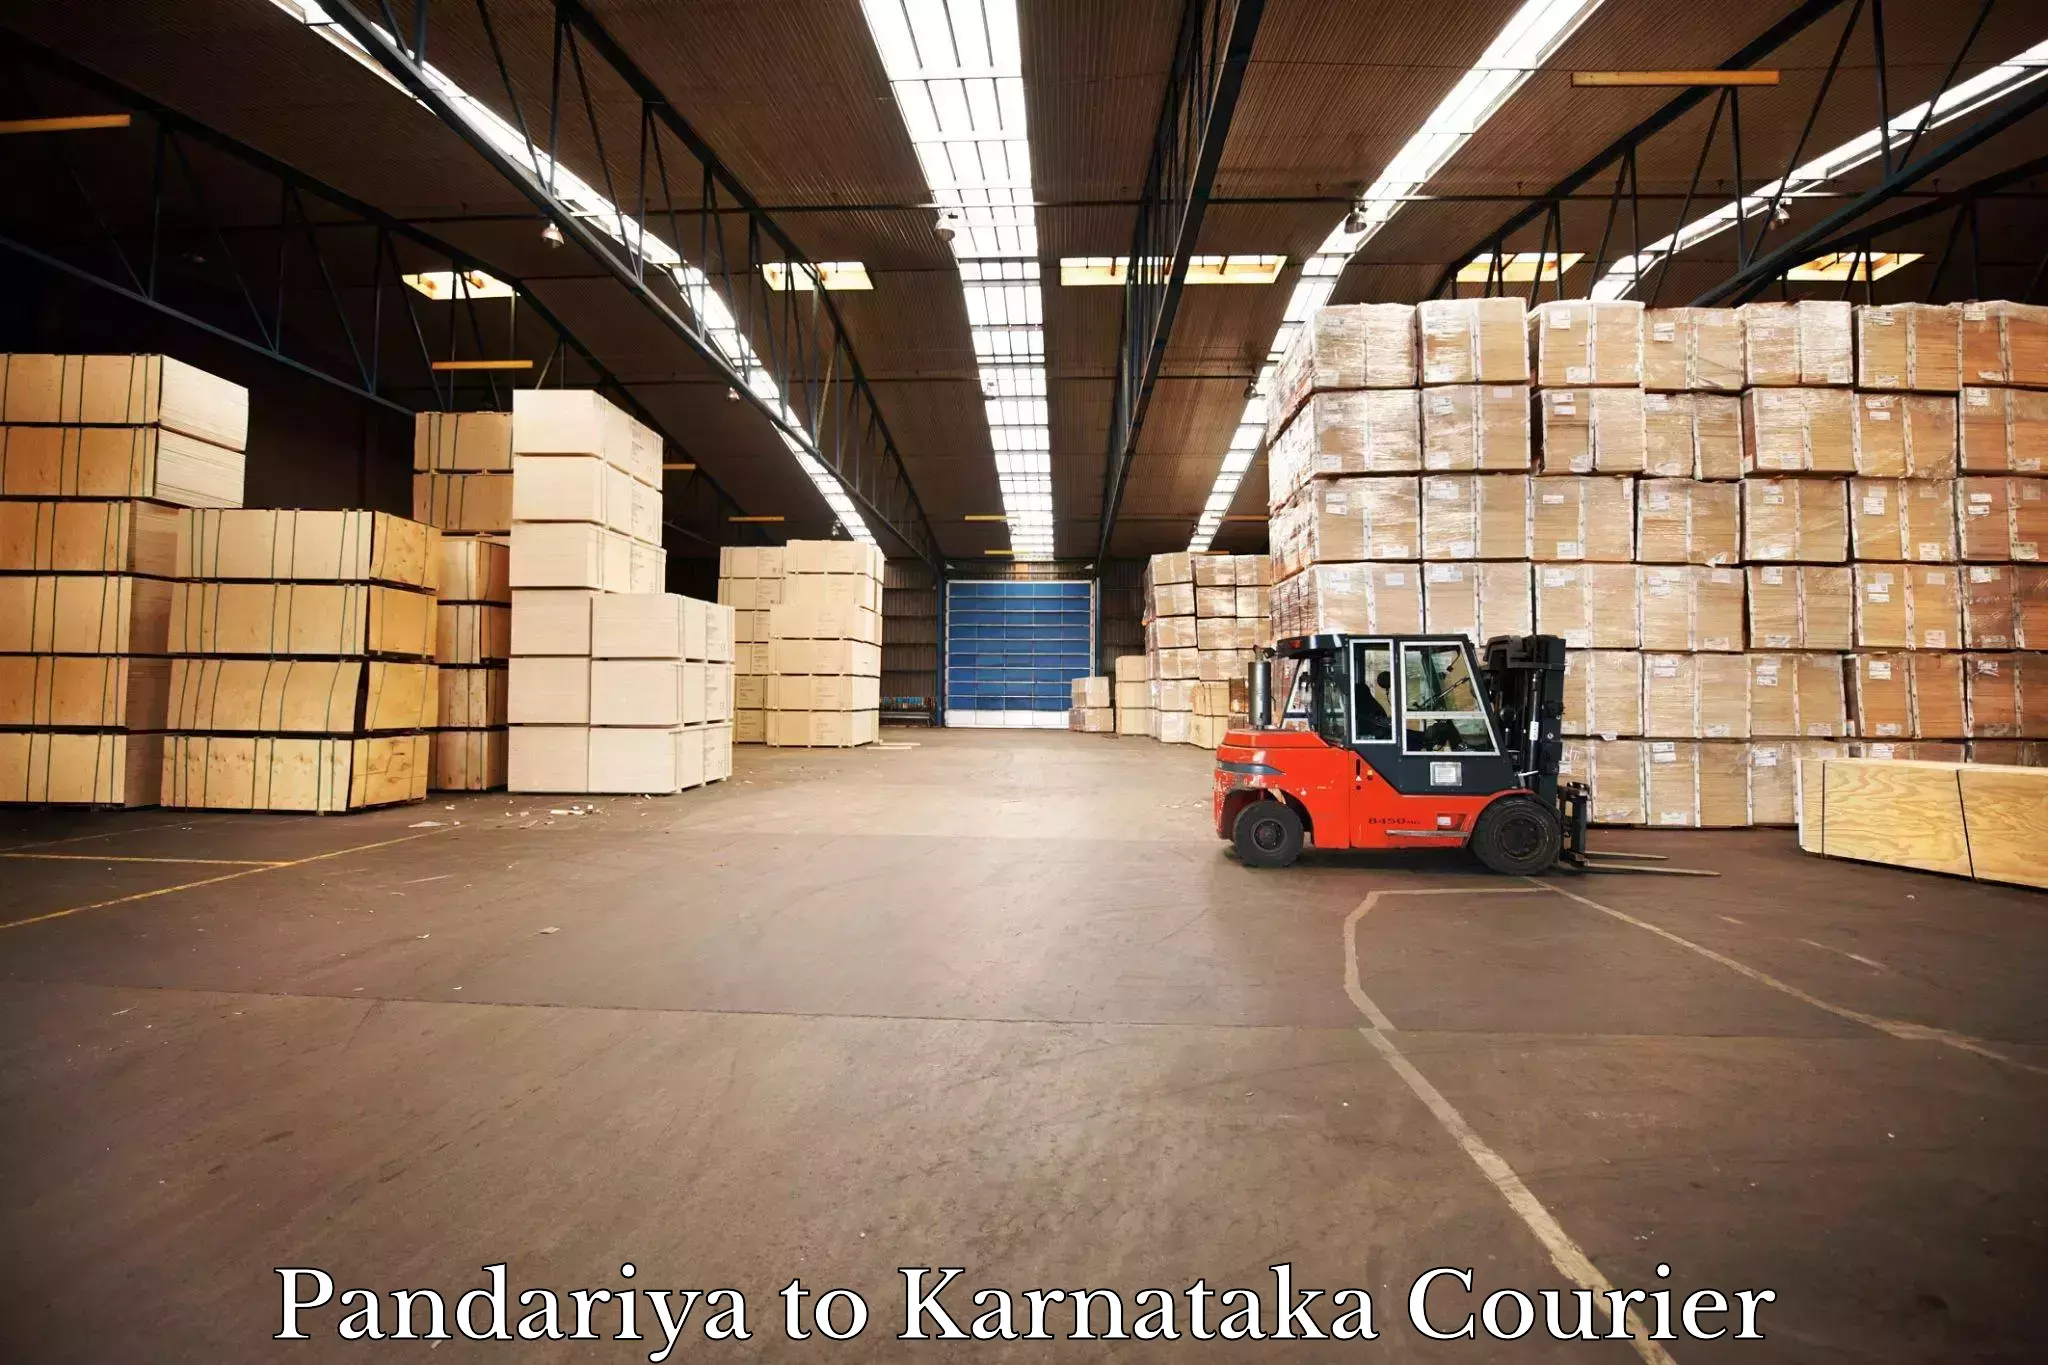 On-call courier service in Pandariya to Bantwal